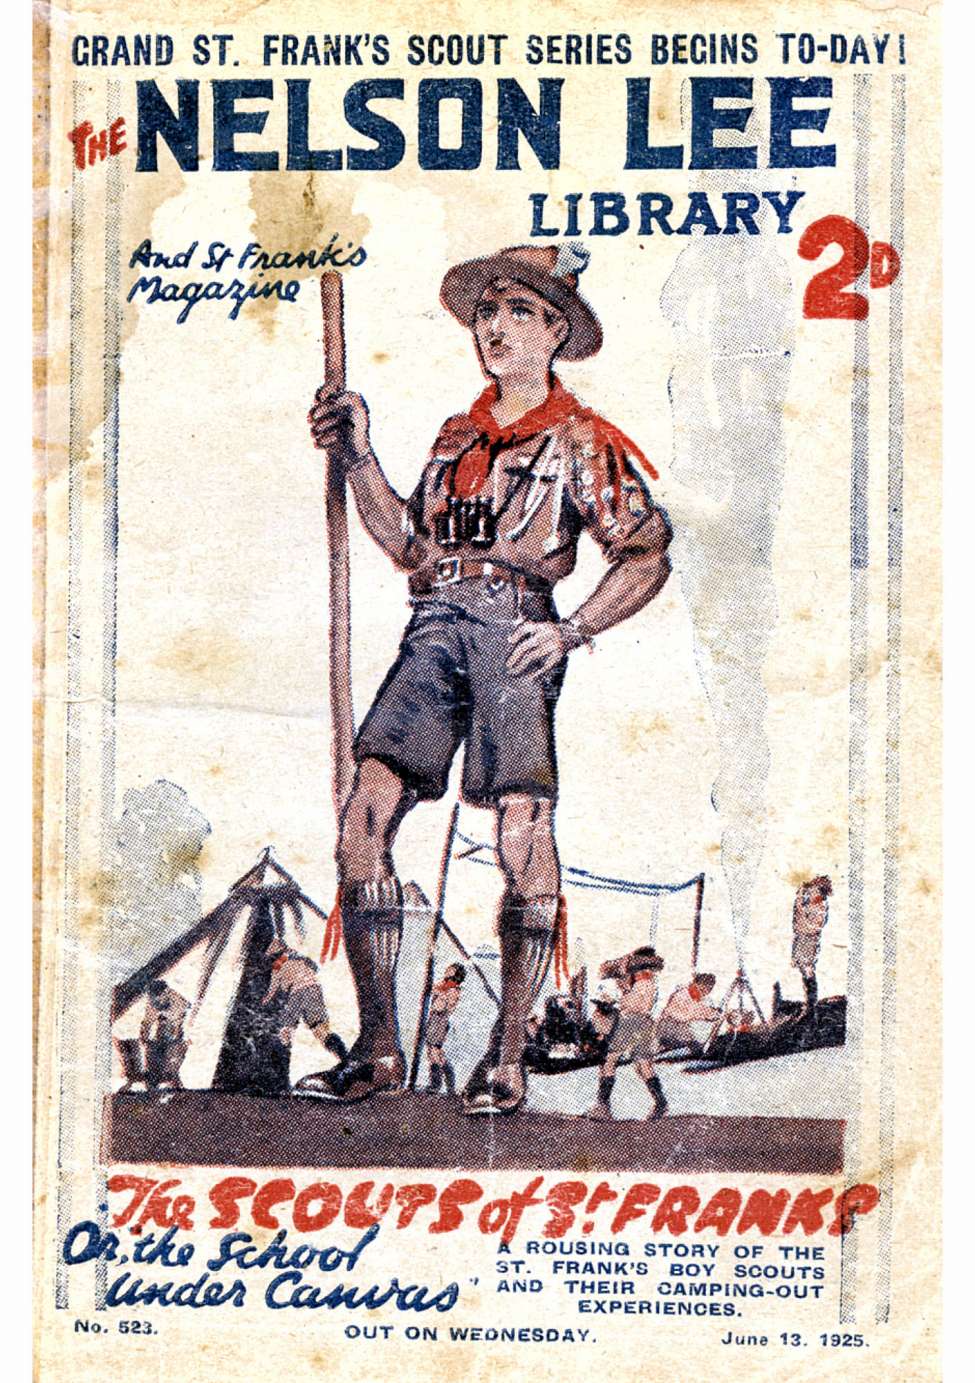 Book Cover For Nelson Lee Library s1 523 - The Scouts of St. Frank’s